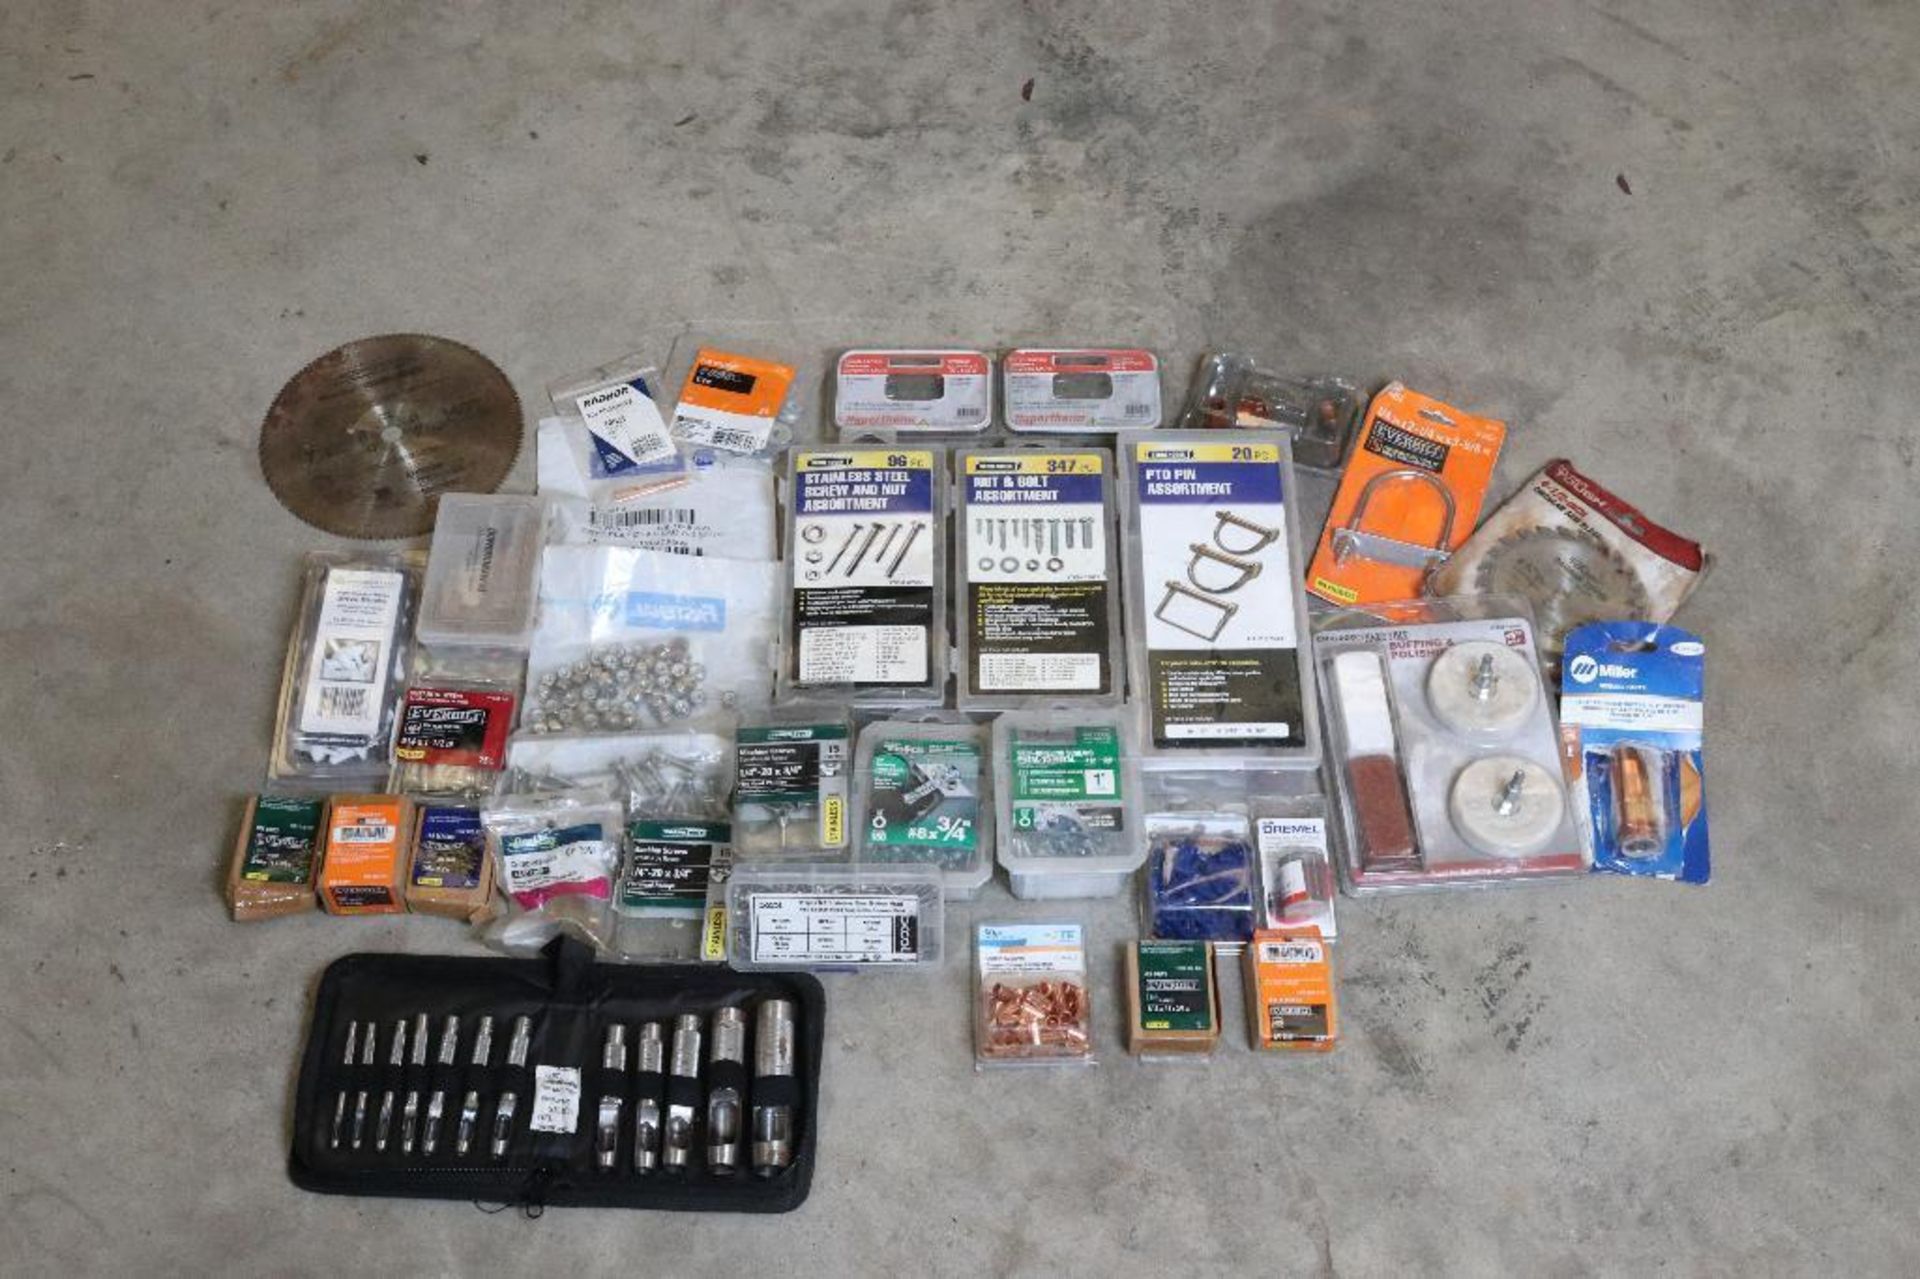 Assortment of Misc. Hardware - Screws, Nozzles, Blades Clamps and More